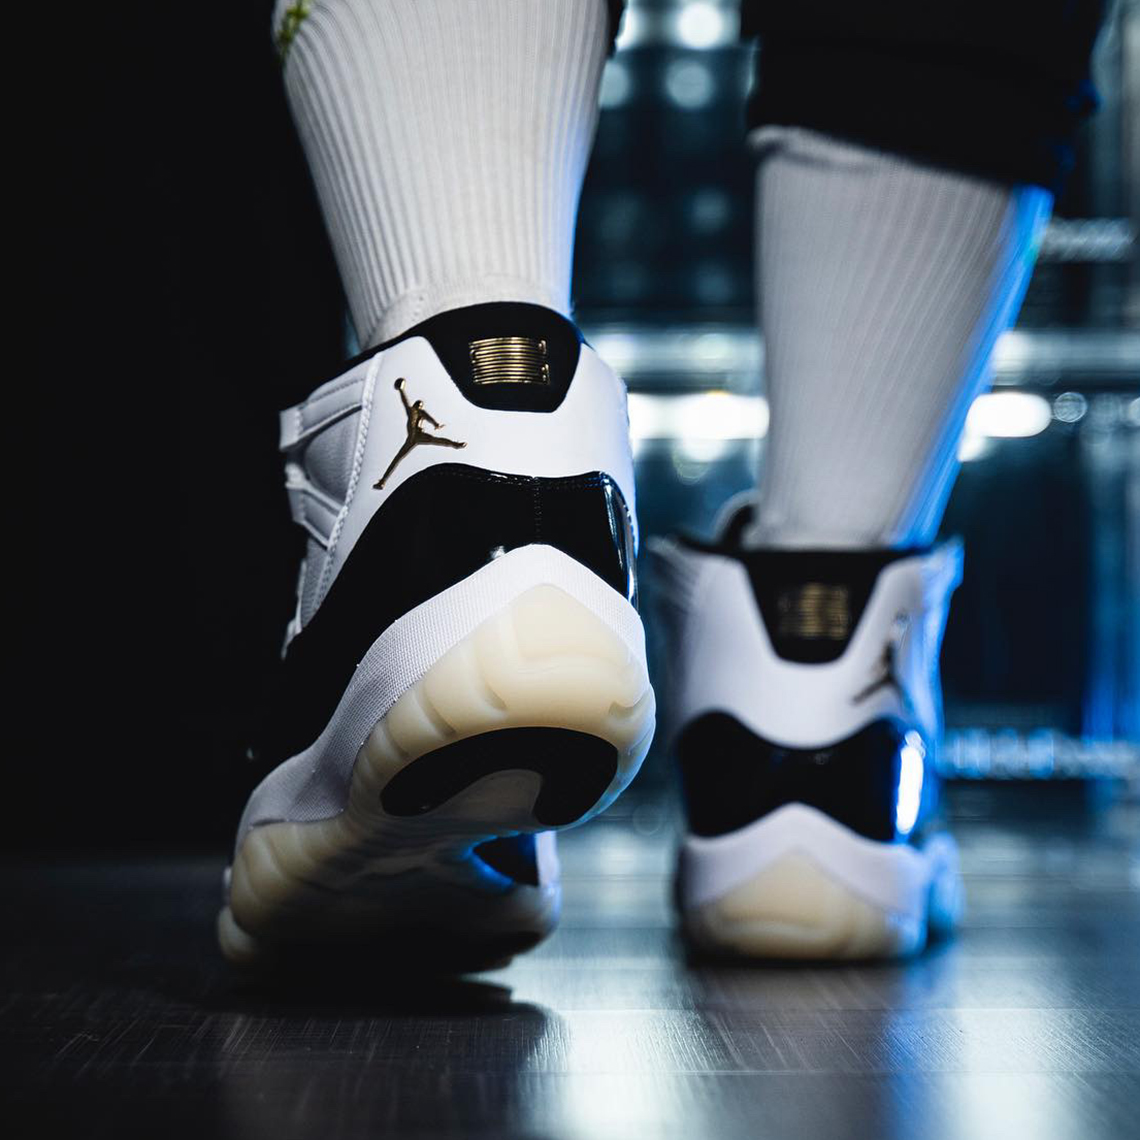 Top 8 Air Jordan 11 Products to Buy at Cootie Store on June 11th-2023, by  Cootie Shop, Jun, 2023